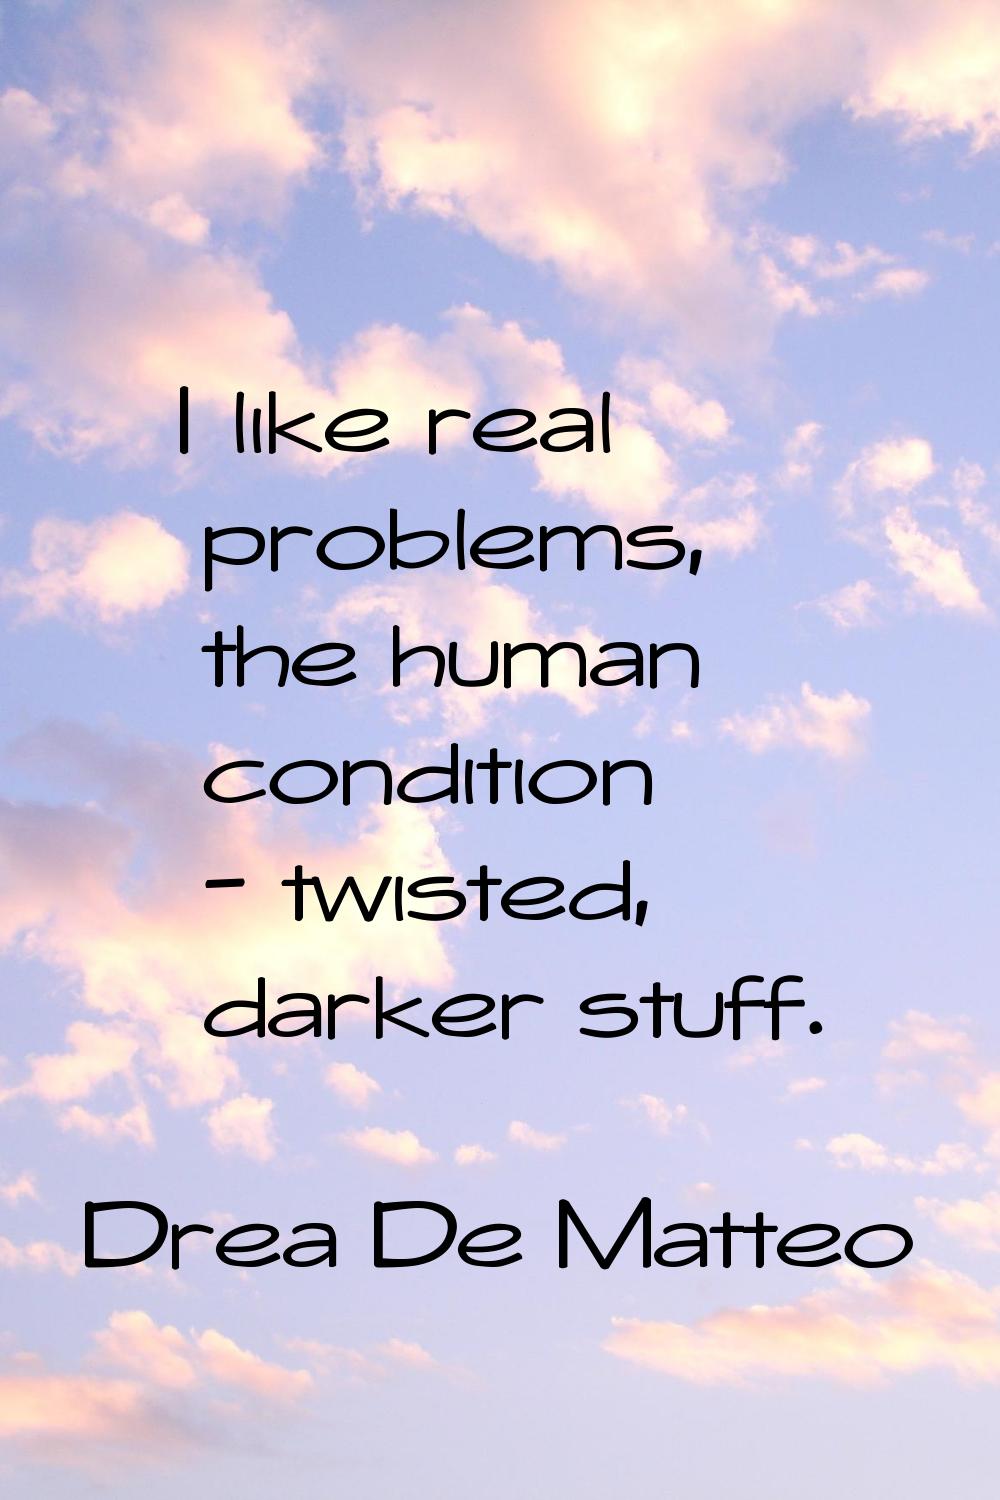 I like real problems, the human condition - twisted, darker stuff.